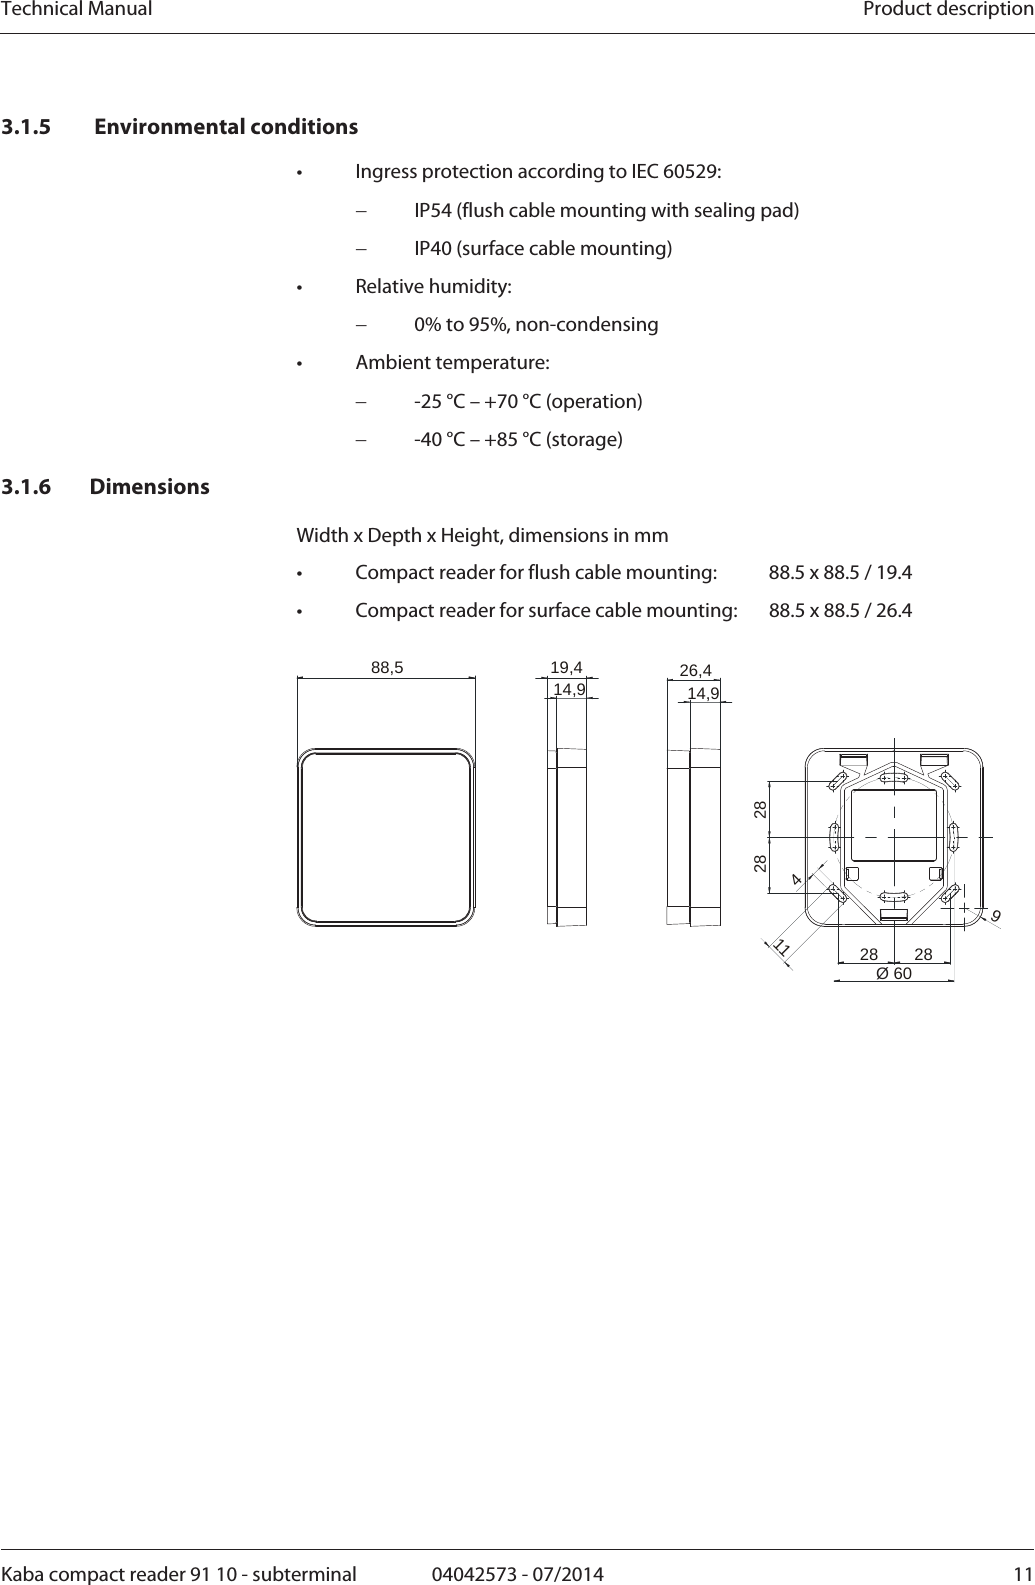 Technical Manual  Product descriptionKaba compact reader 91 10 - subterminal  04042573 - 07/2014  113.1.5  Environmental conditions •  Ingress protection according to IEC 60529:  IP54 (flush cable mounting with sealing pad)  IP40 (surface cable mounting) • Relative humidity:  0% to 95%, non-condensing • Ambient temperature:  -25 °C – +70 °C (operation)  -40 °C – +85 °C (storage) 3.1.6 Dimensions Width x Depth x Height, dimensions in mm •  Compact reader for flush cable mounting:  88.5 x 88.5 / 19.4 •  Compact reader for surface cable mounting:  88.5 x 88.5 / 26.4  19,414,9 26,414,988,52828411928 28Ø60 